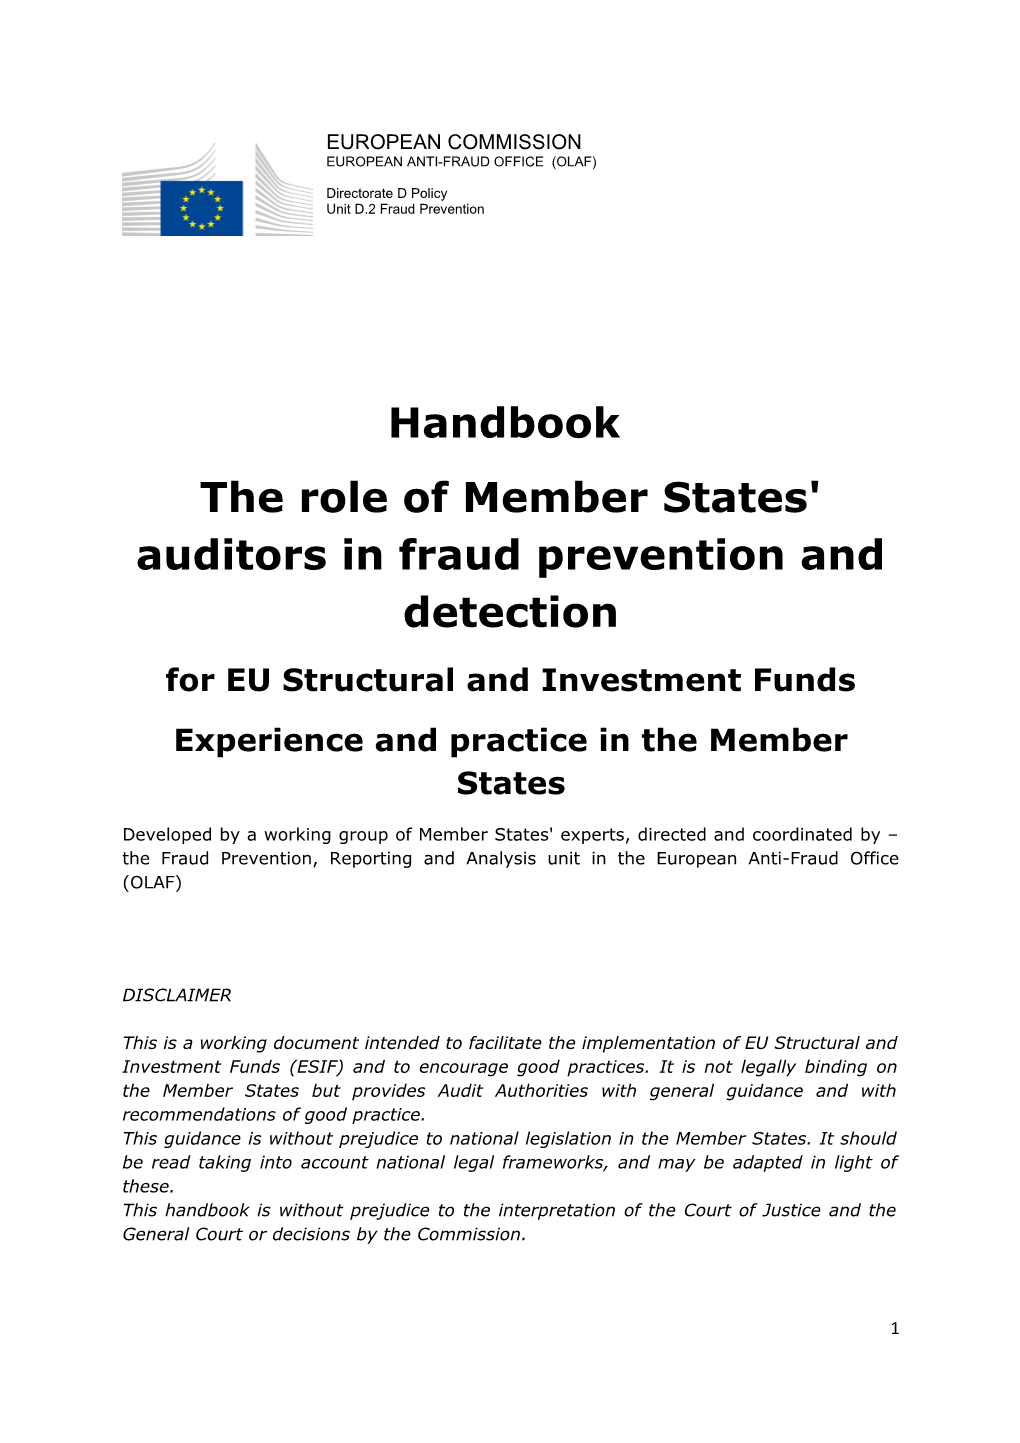 Handbook the Role of Member States' Auditors in Fraud Prevention and Detection for EU Structural